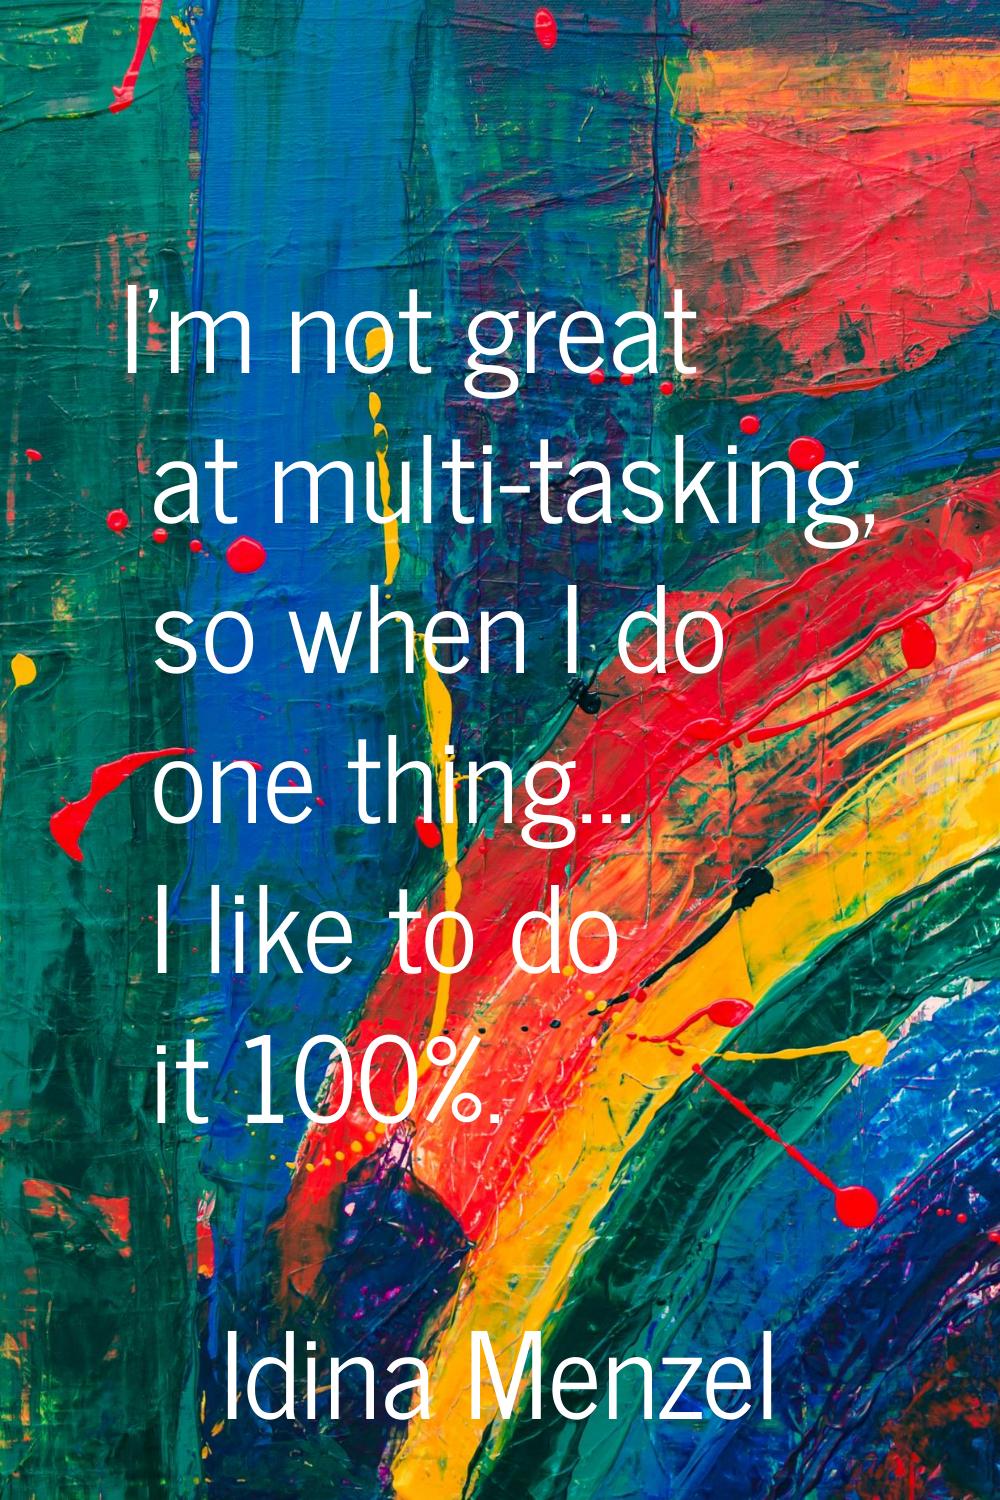 I'm not great at multi-tasking, so when I do one thing... I like to do it 100%.